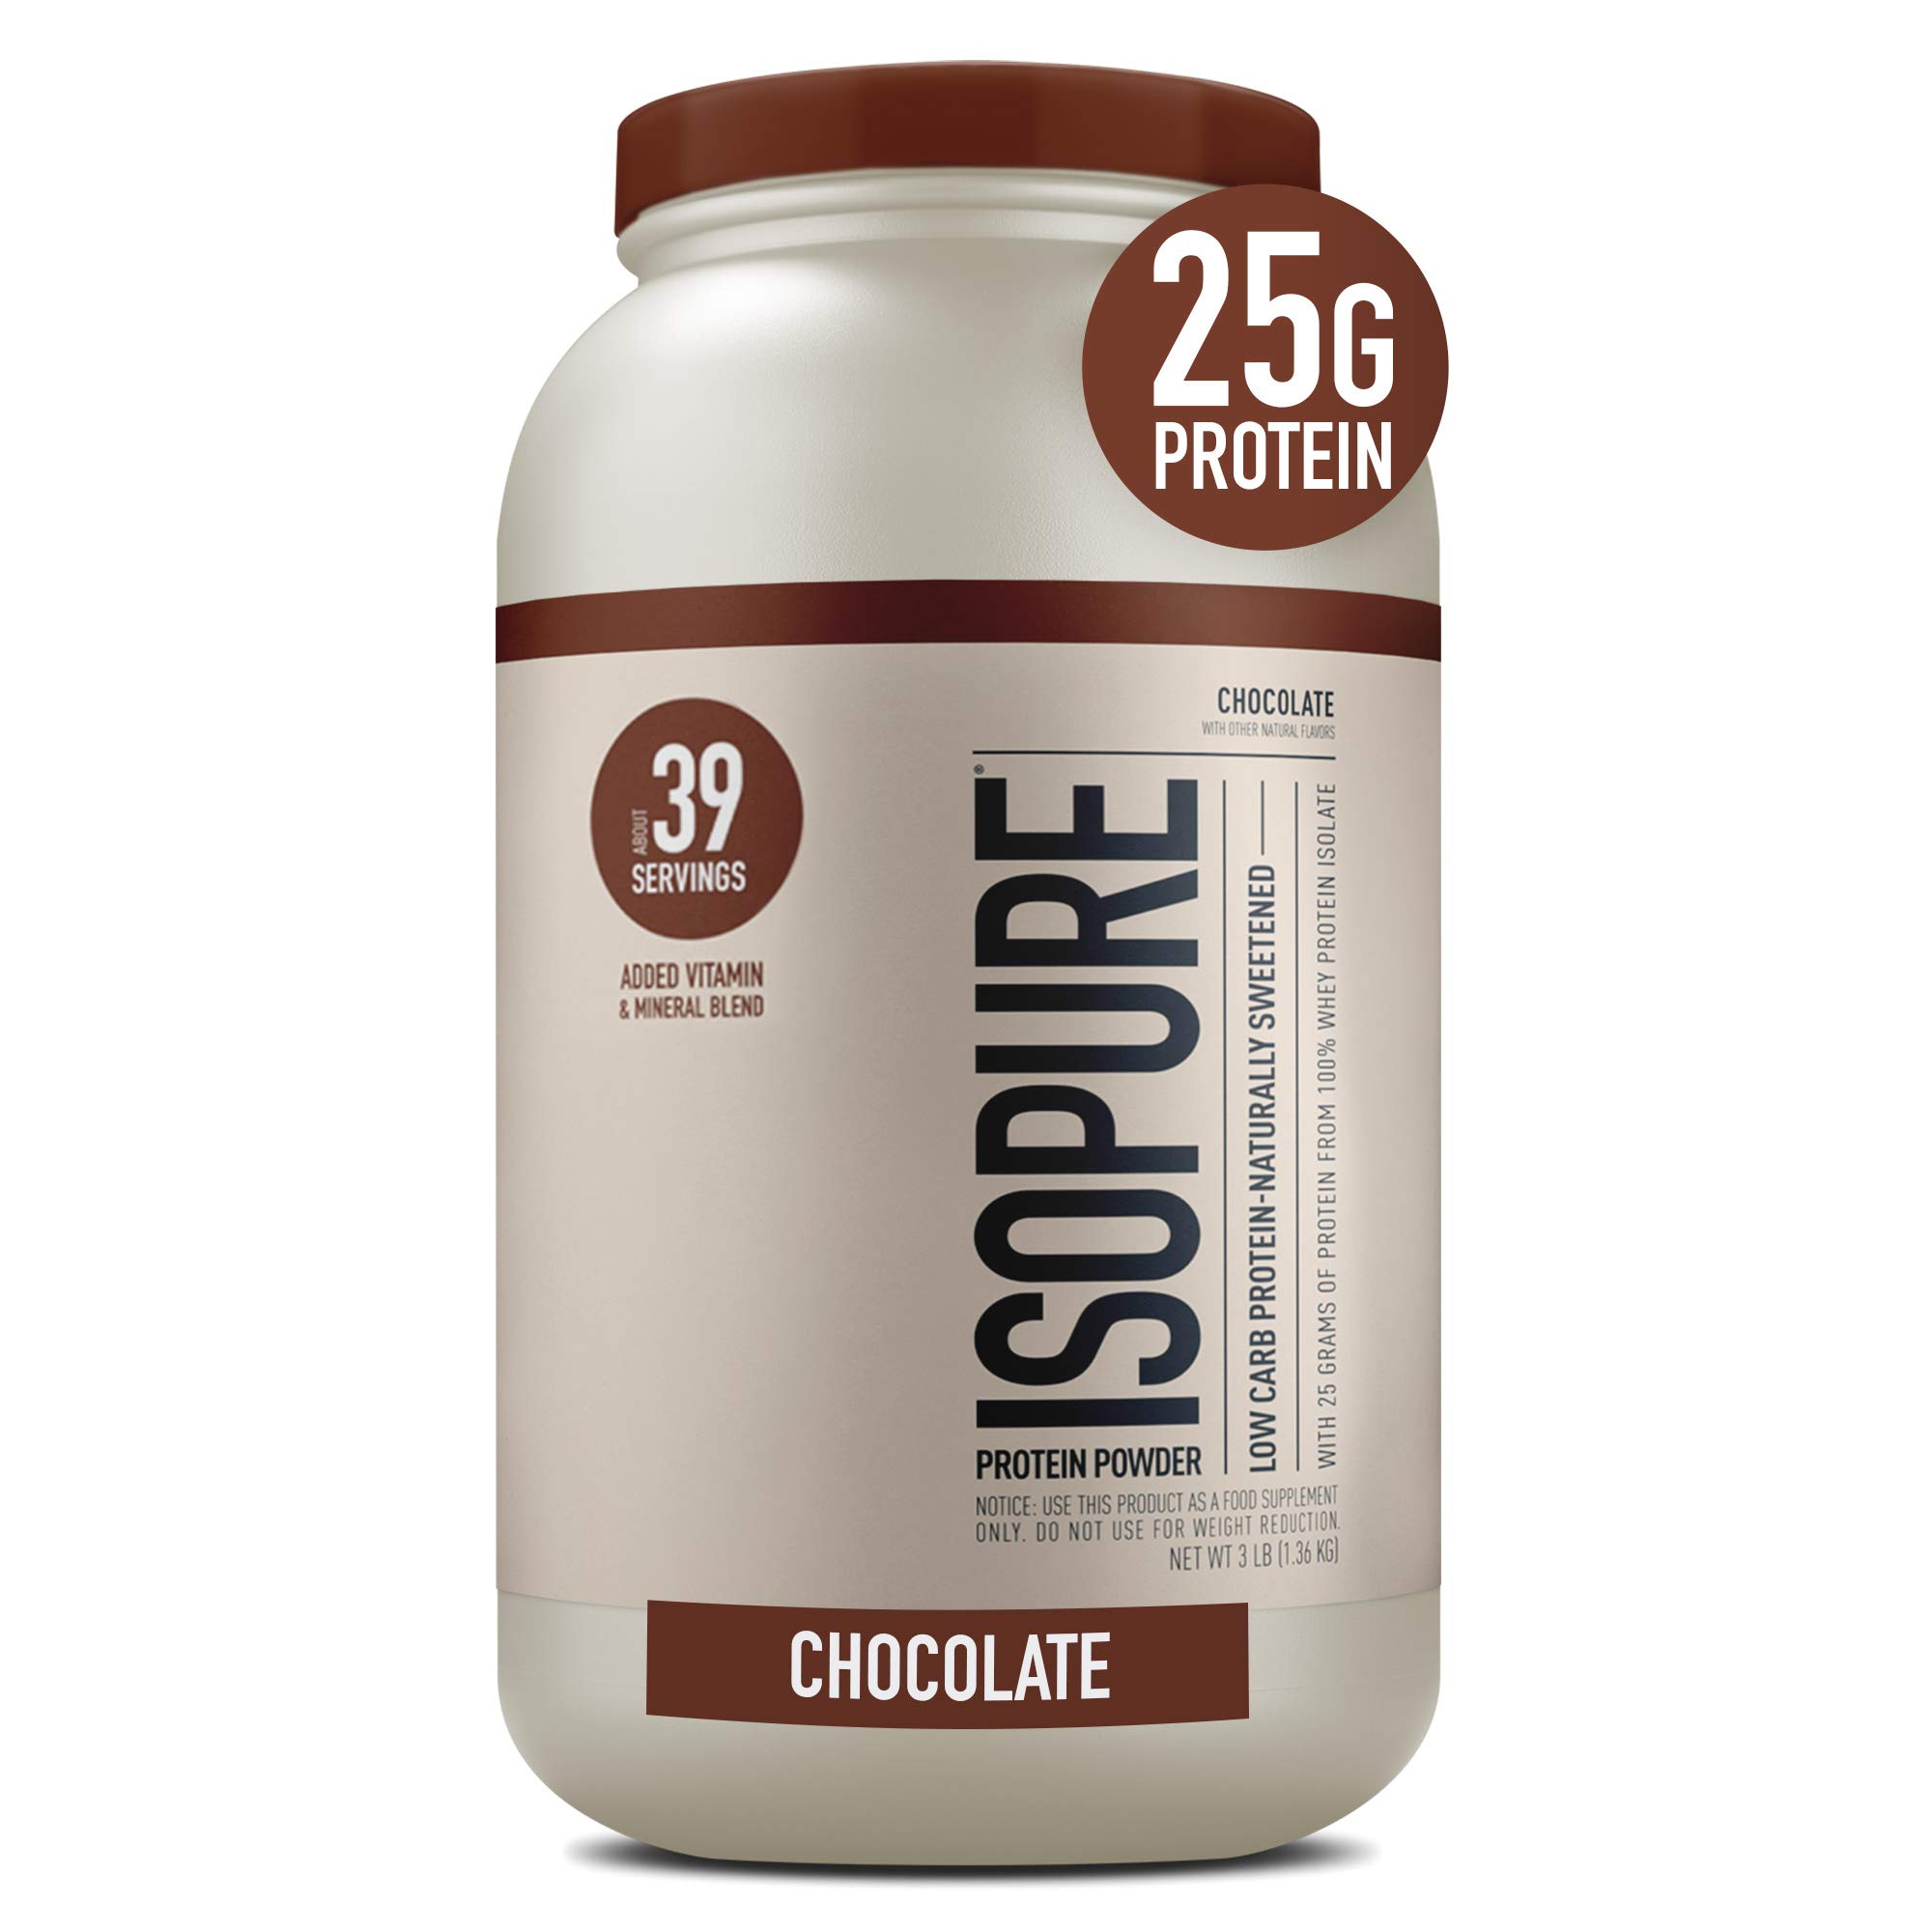 Isopure Protein Powder, Whey Protein Isolate Powder with Vitamin C & Zinc for Immune Support, 25g Protein, Low Carb & Keto Friendly, Flavor: Chocolate, 39 Servings, 3 Pounds (Packaging May Vary)